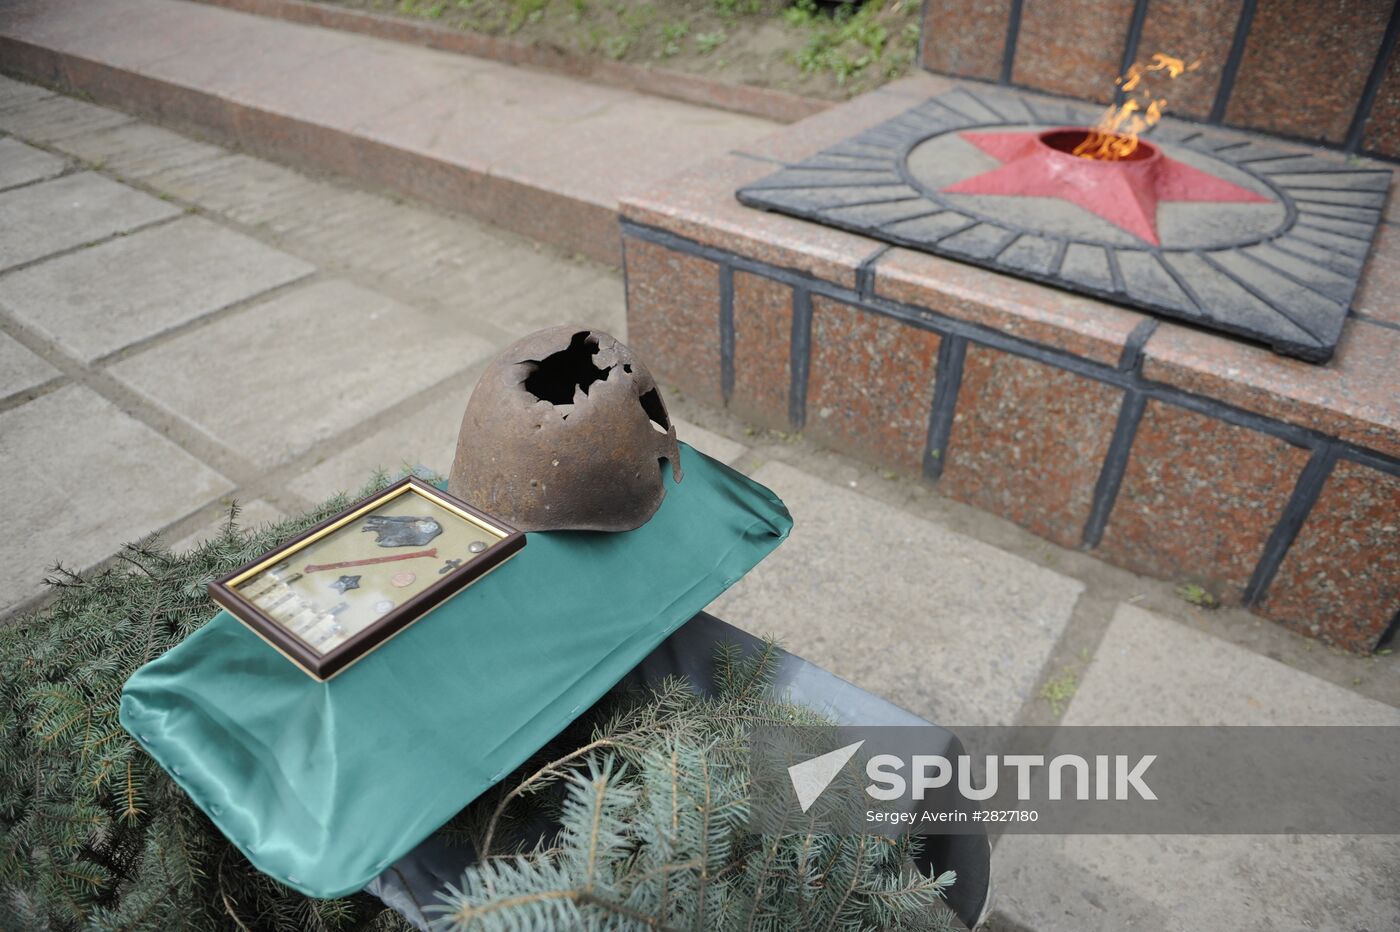 Relics of serviceman killed in action in 1943 during battle for Slavyansk transferred to Russia